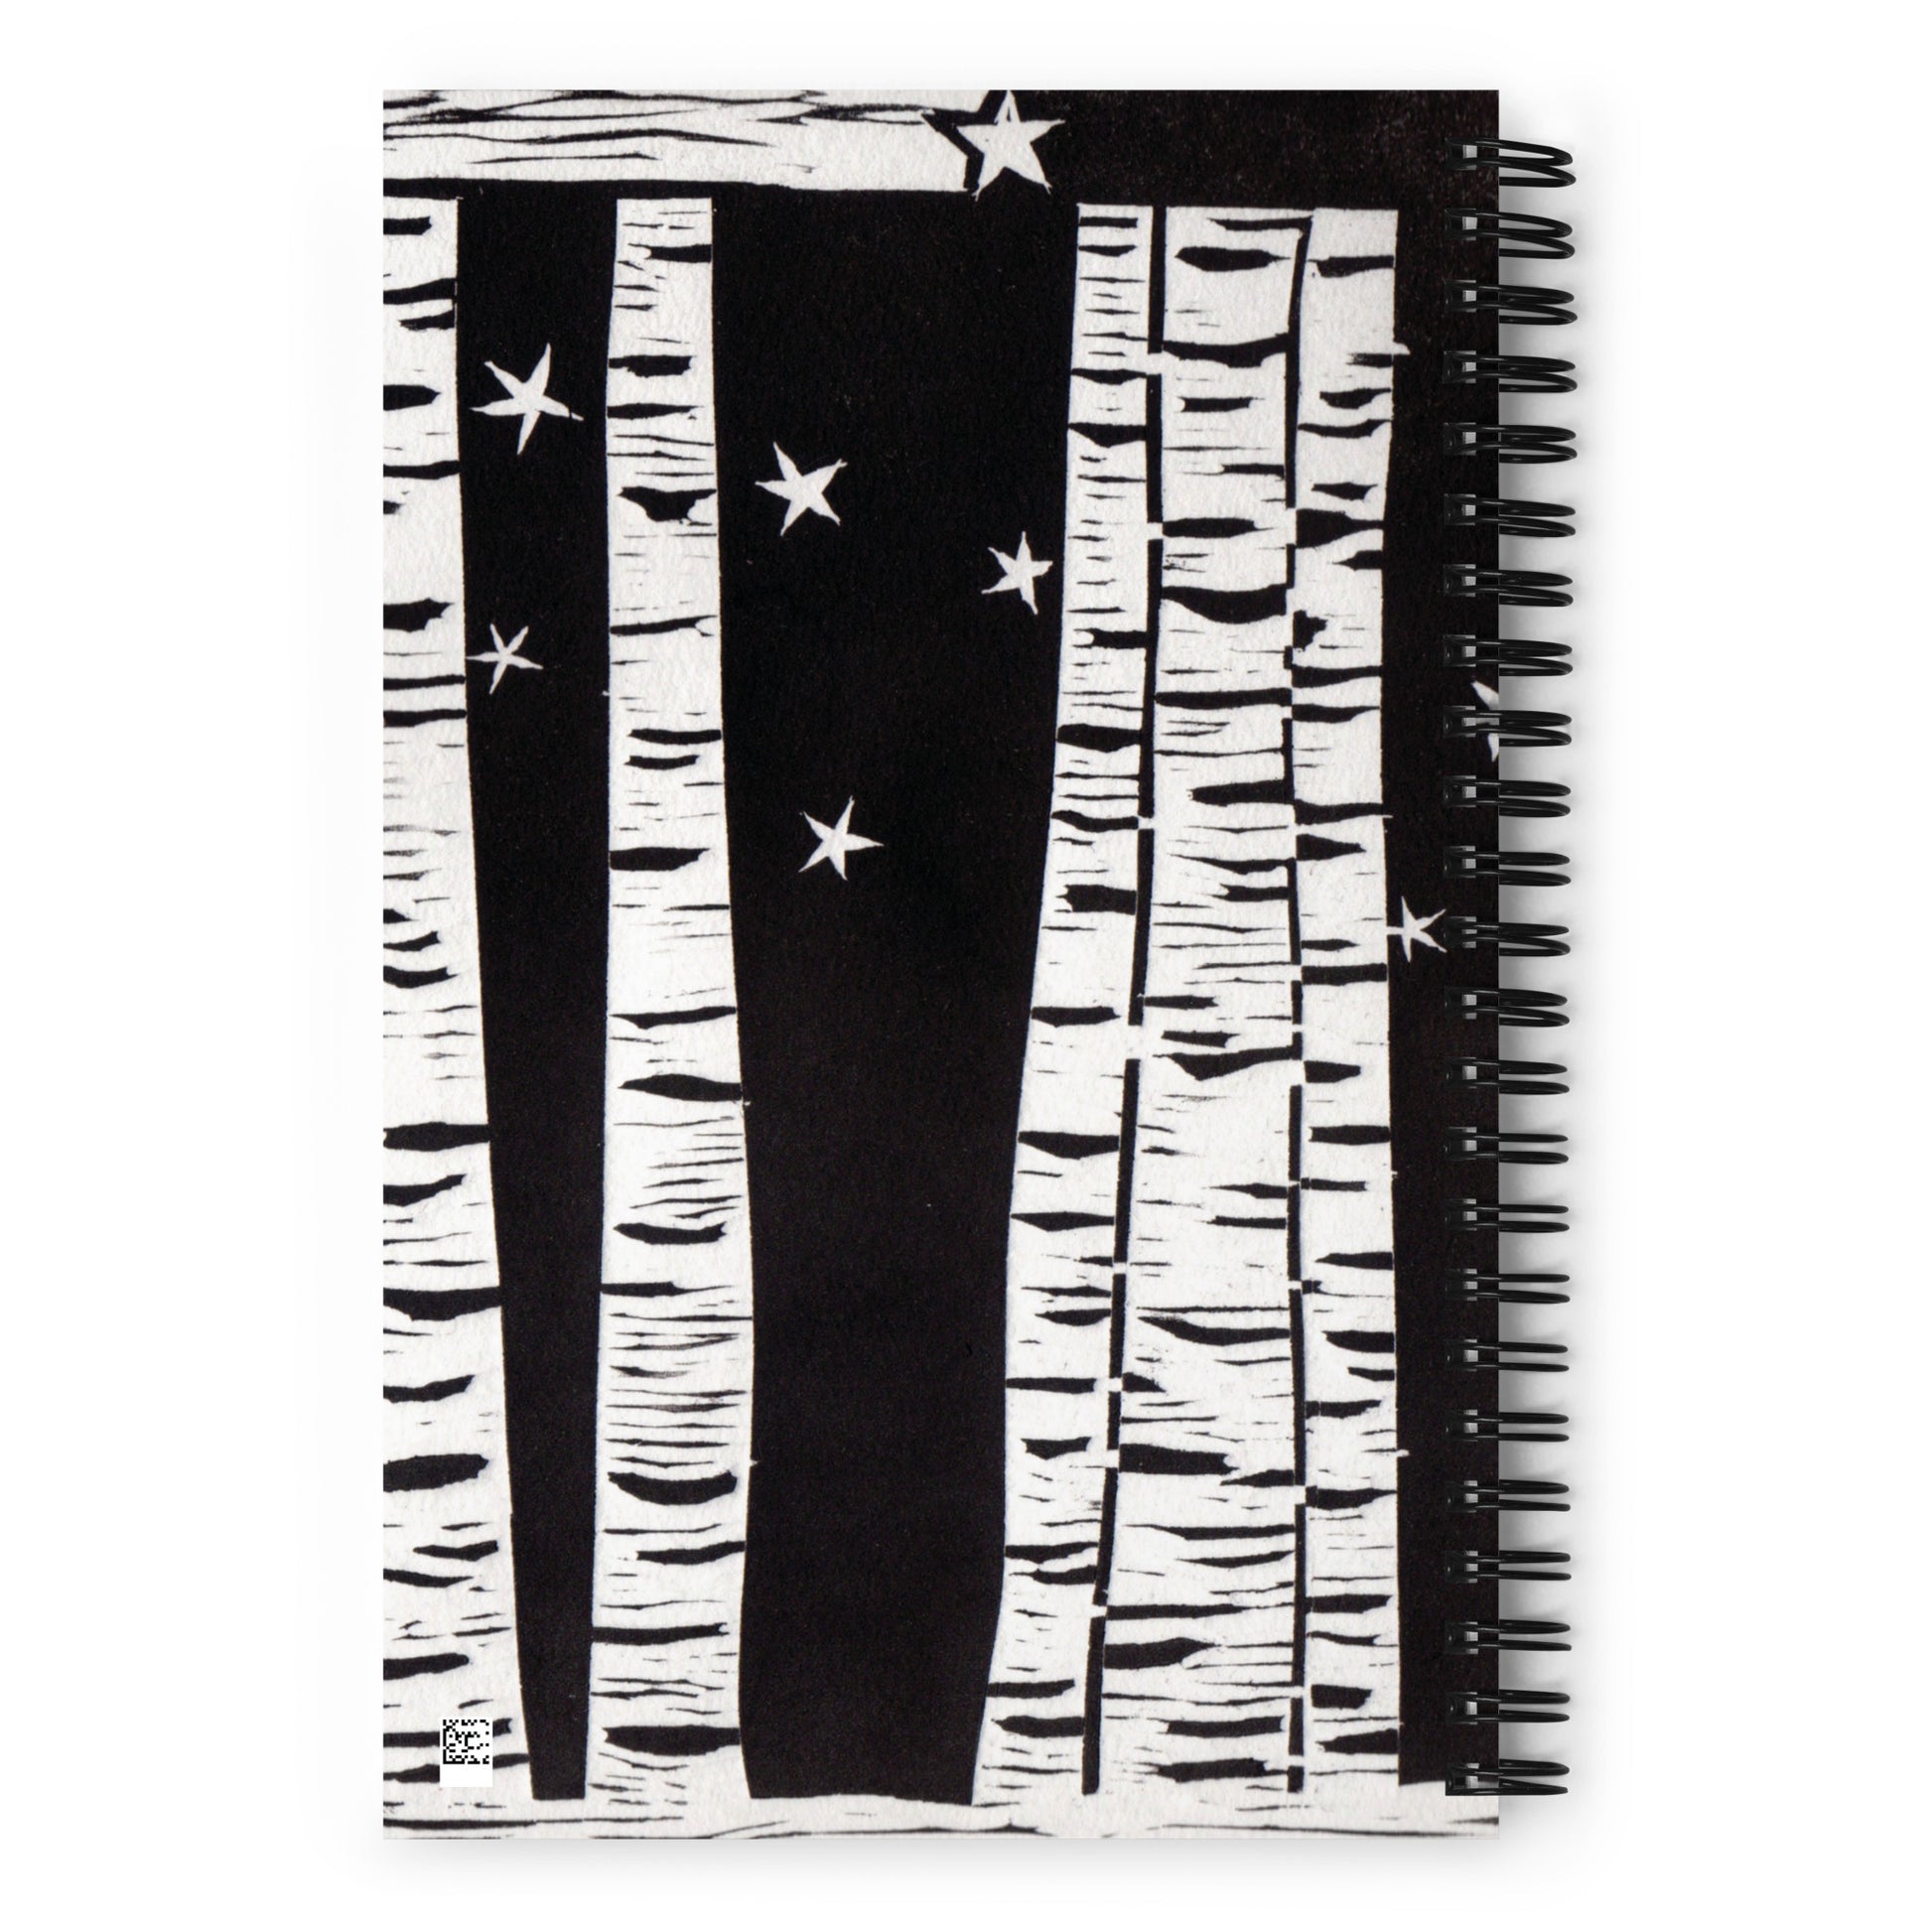 A notebook with a black and white image of trees and stars